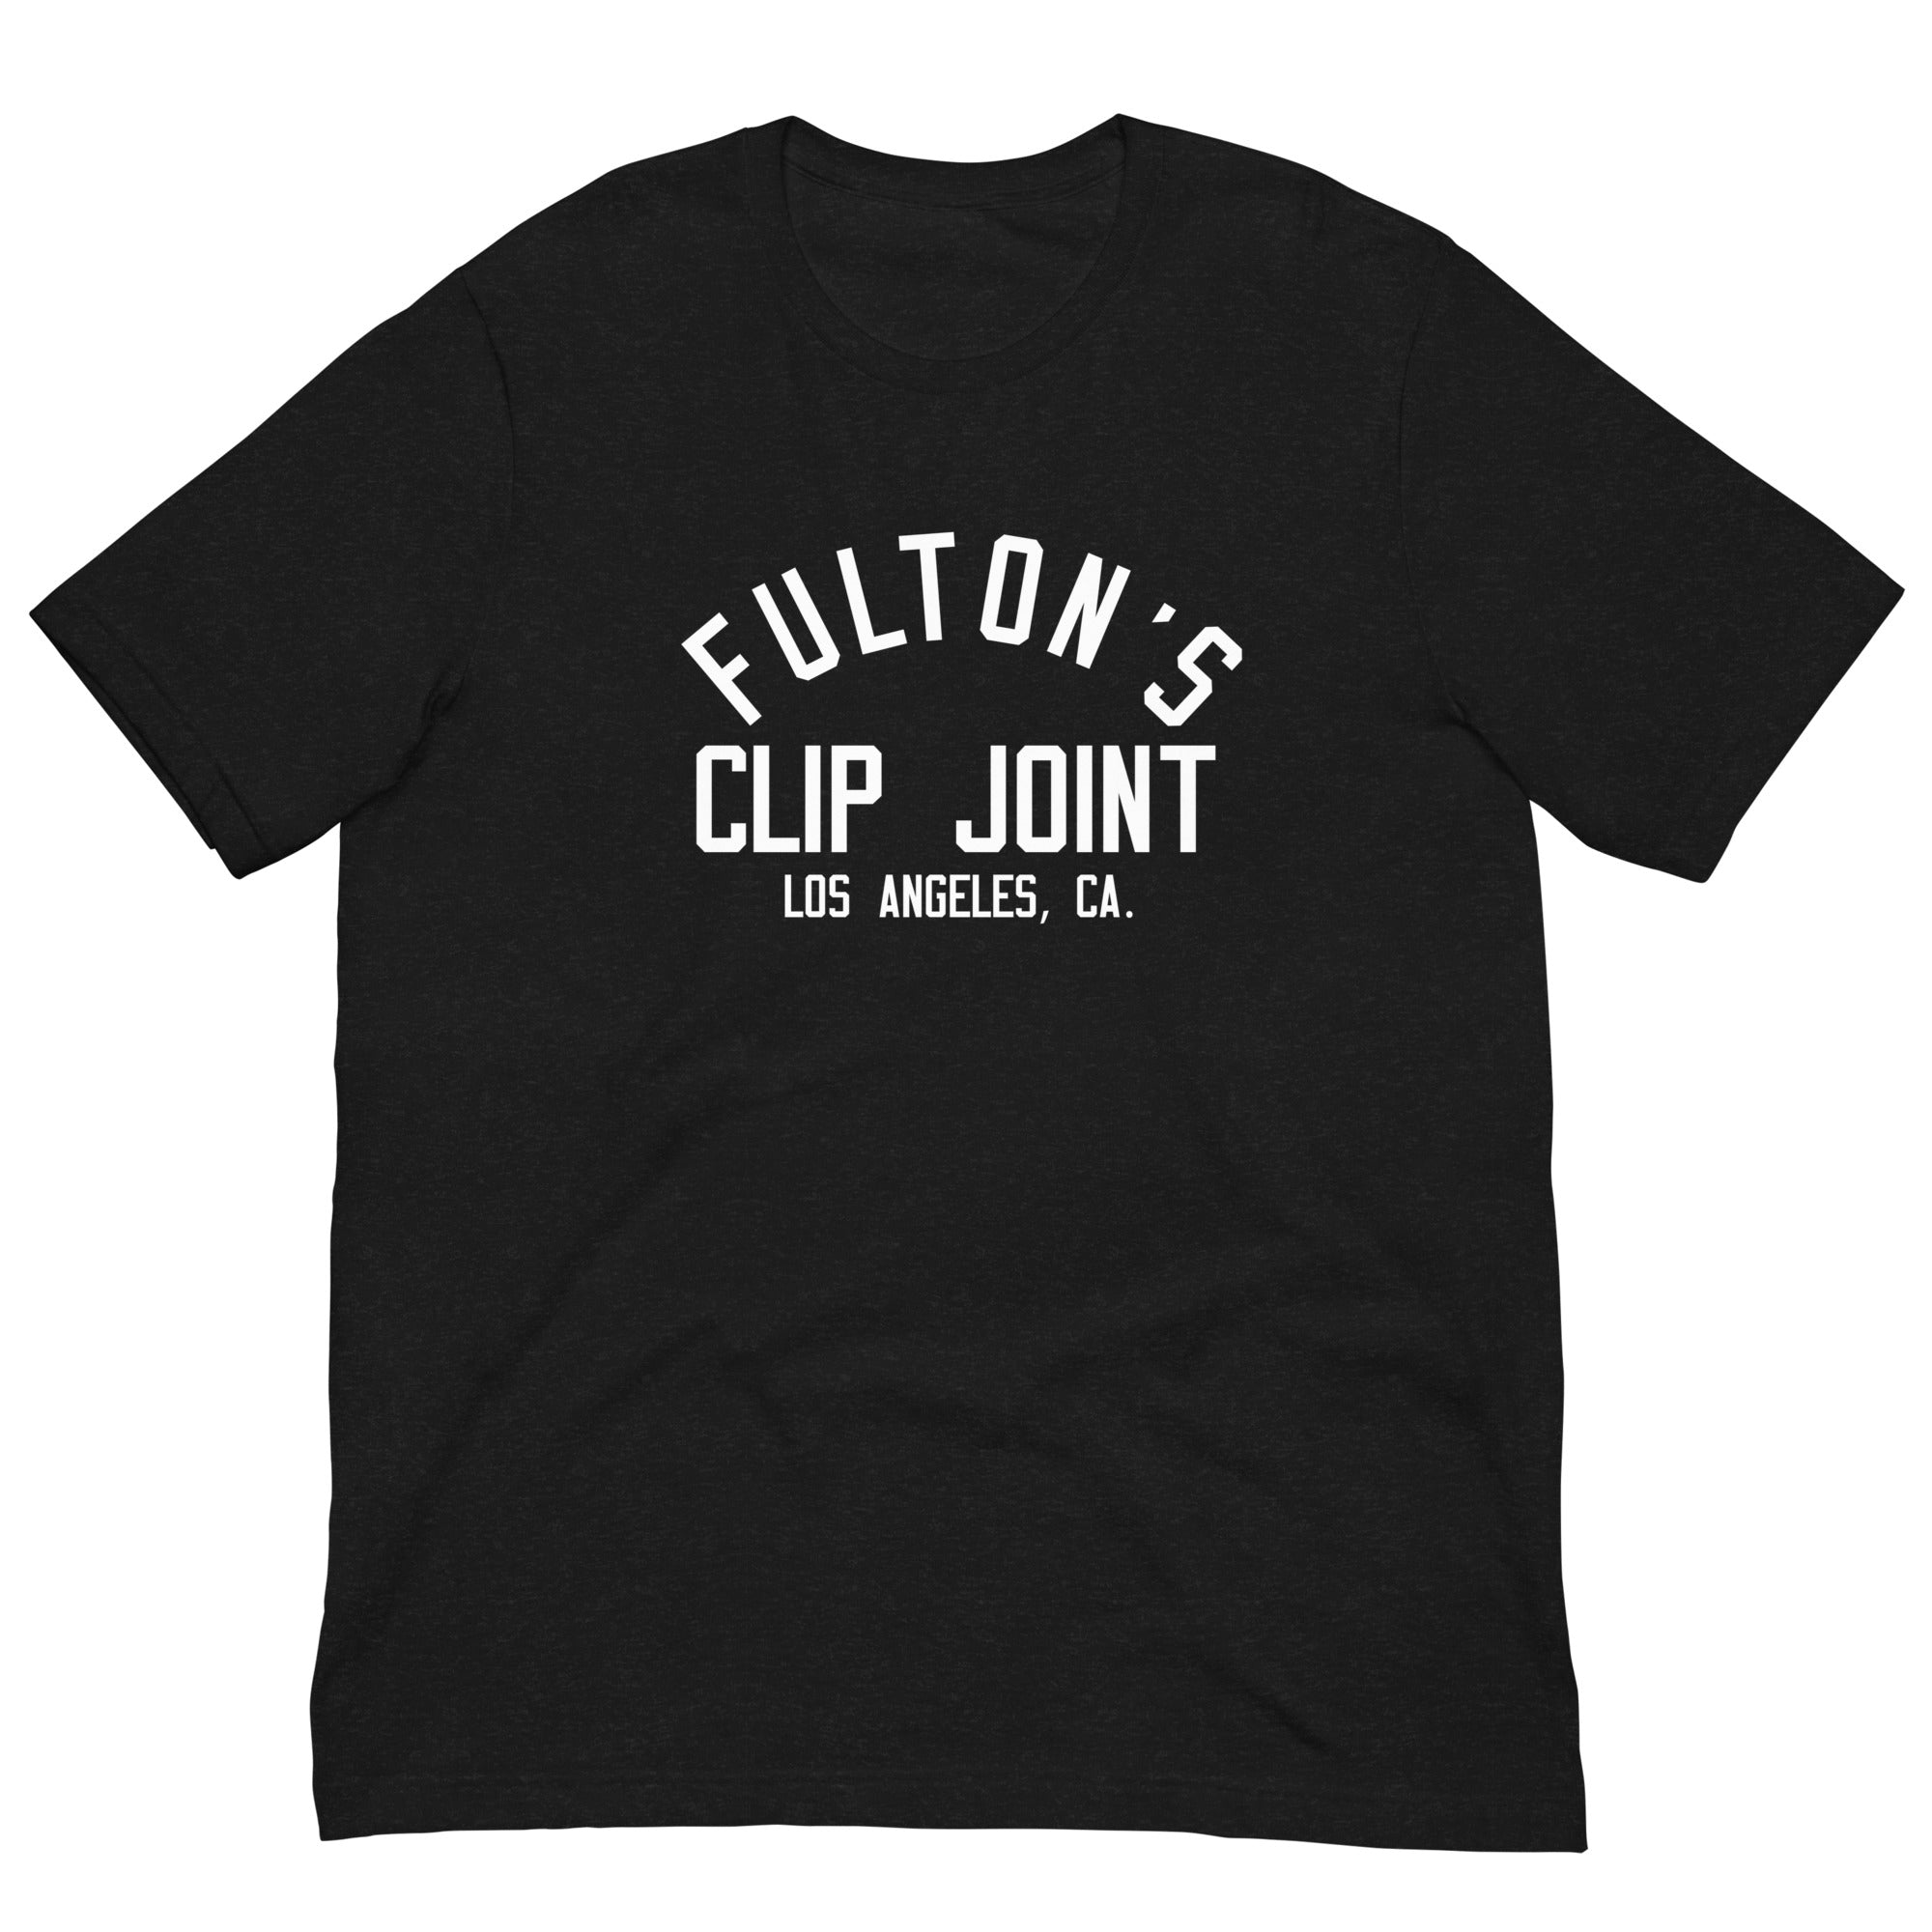 Fulton's Clip Joint T Shirt